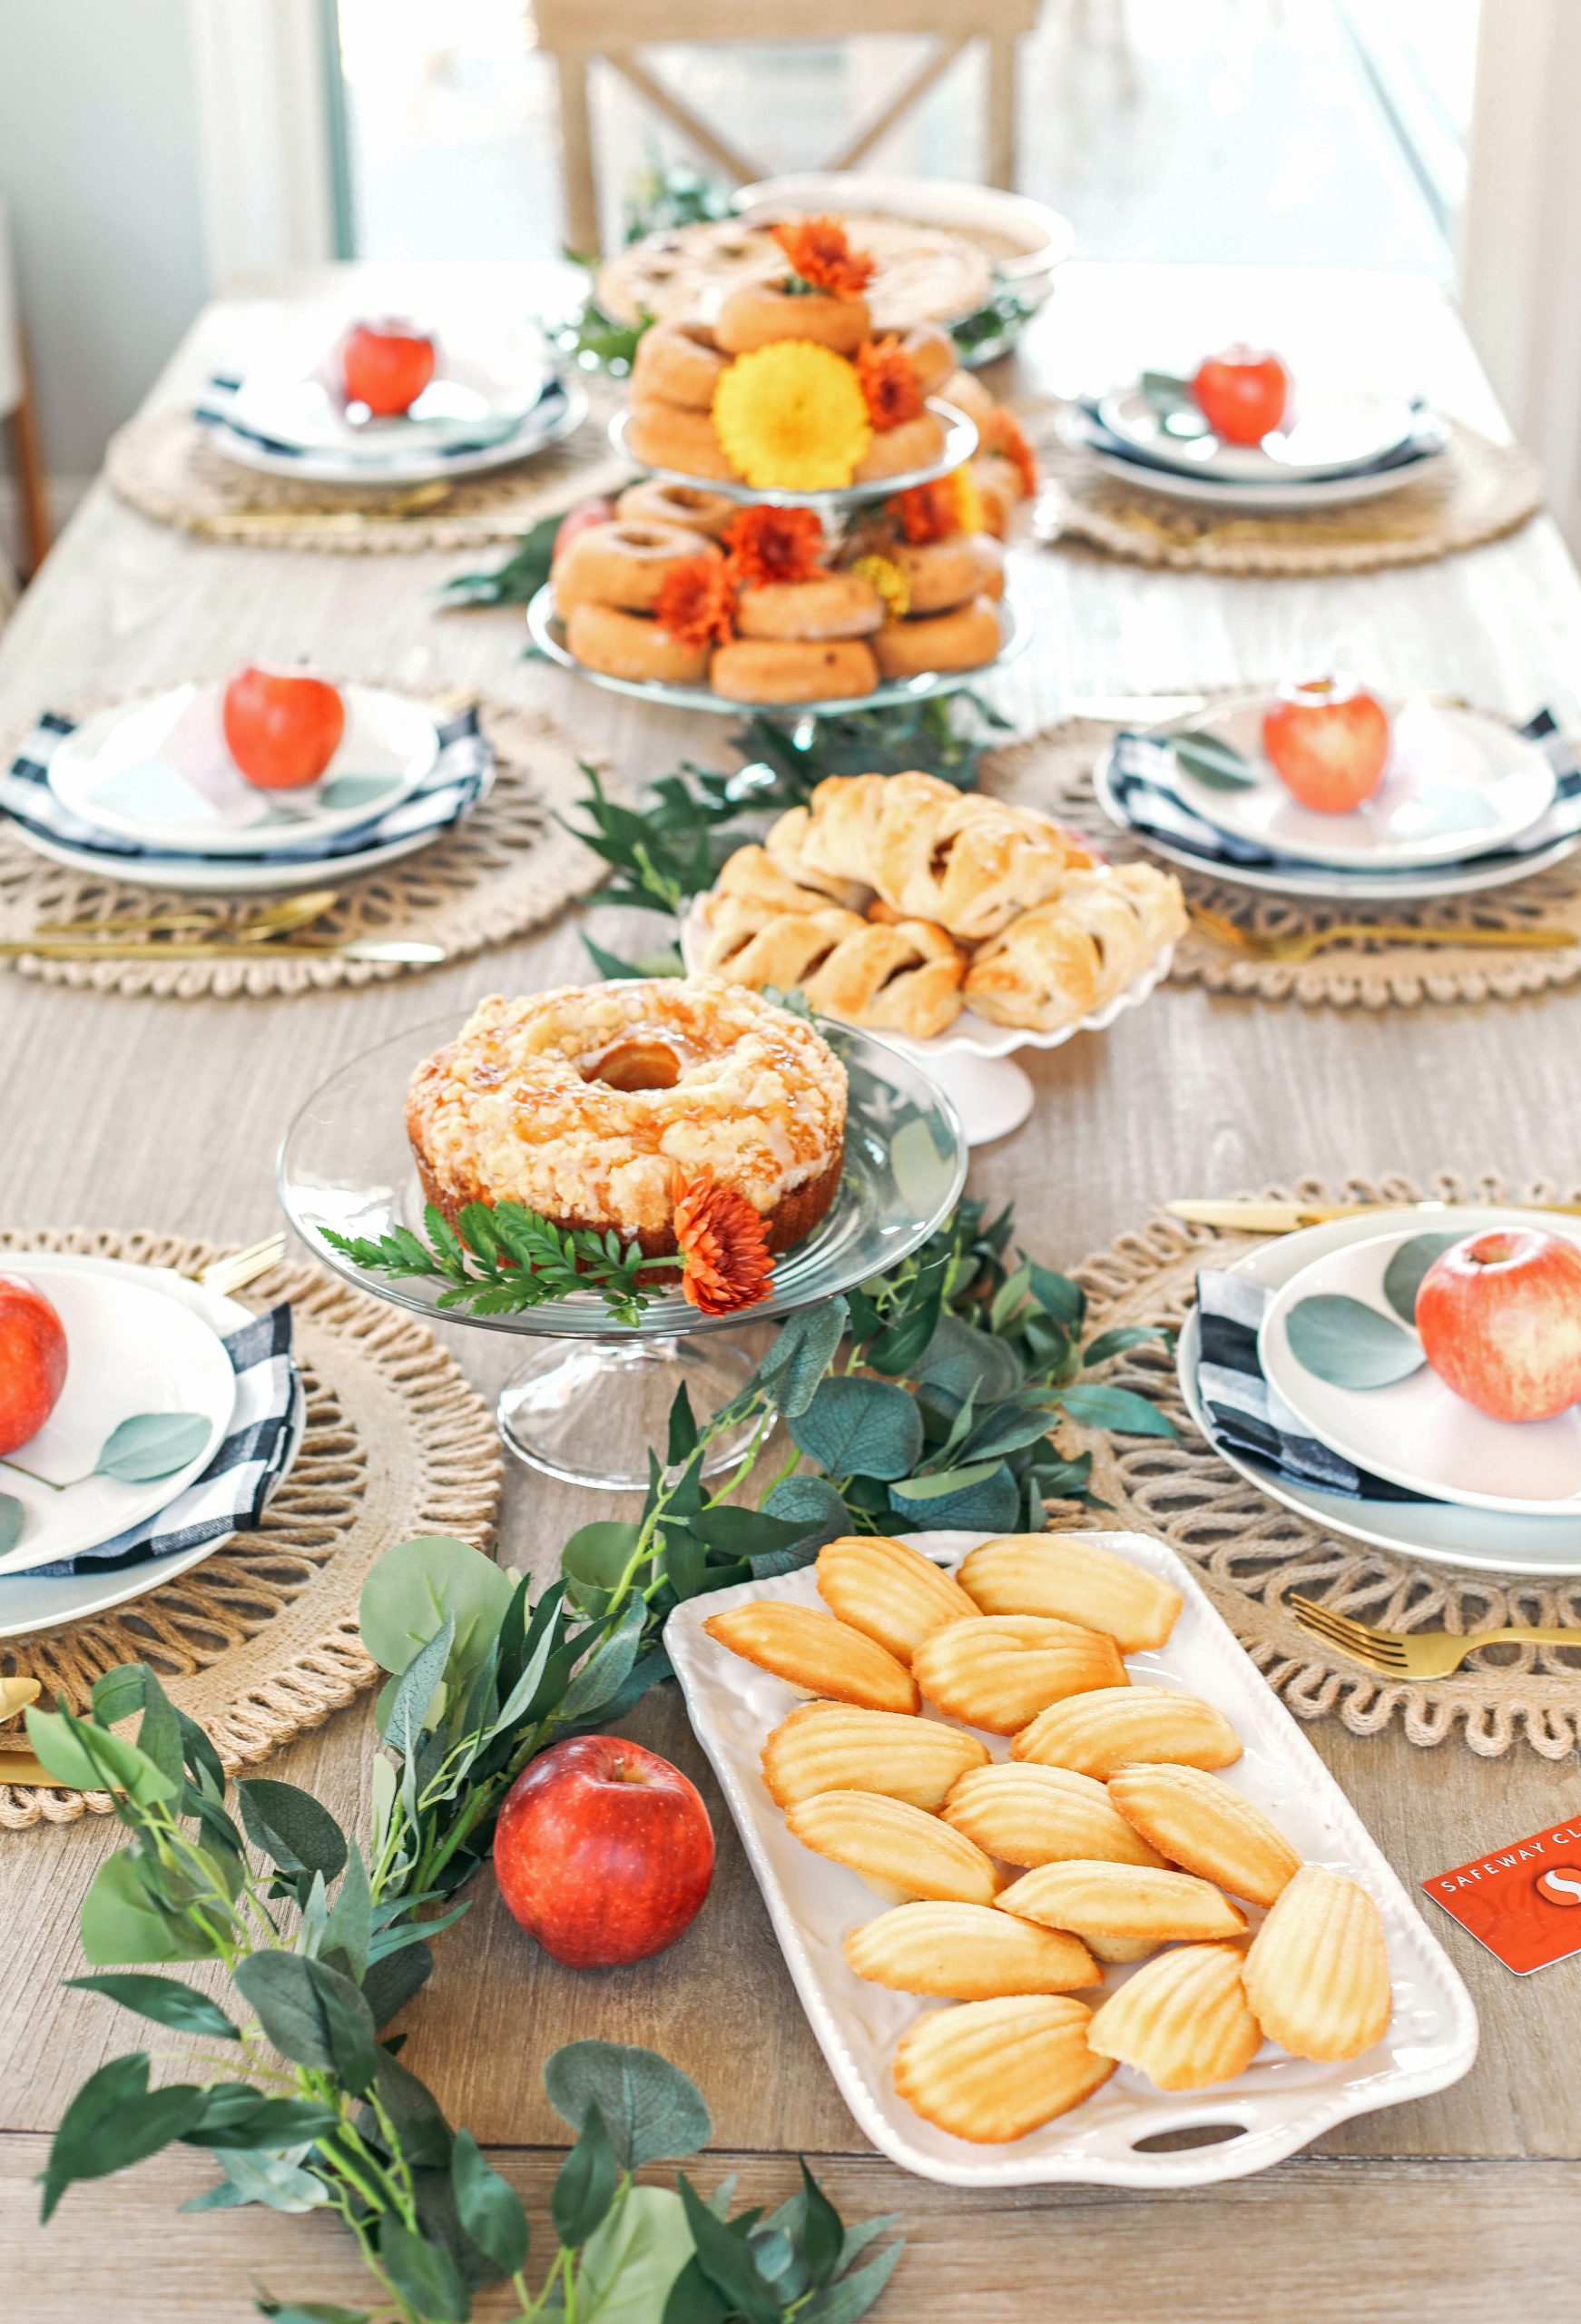 Whether hosting family this holiday or throwing together a quick brunch, here are some fun tips for creating a beautiful fall-inspired table!